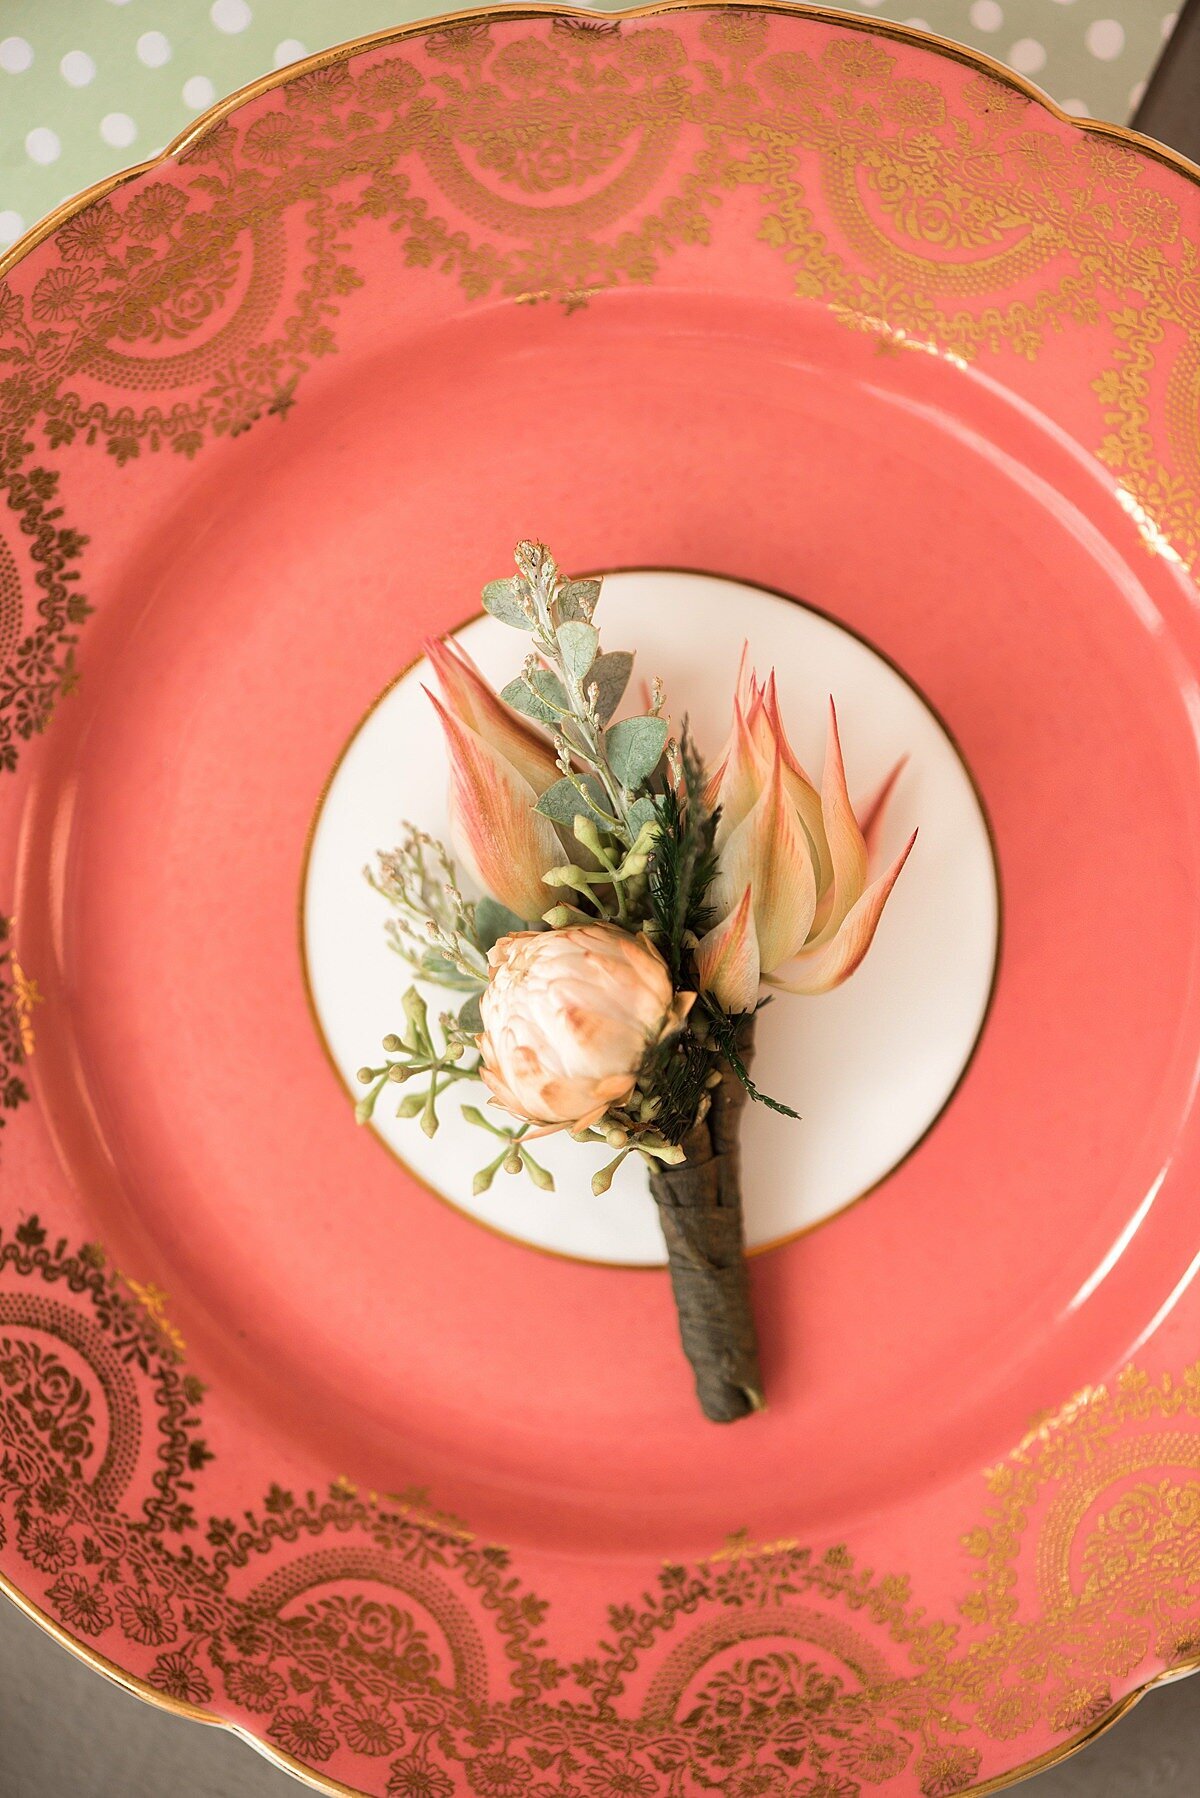 Groom's blush and peach boutonniere with a protea and tea rose on a coral vintage china dessert plate decorated with gold filagree